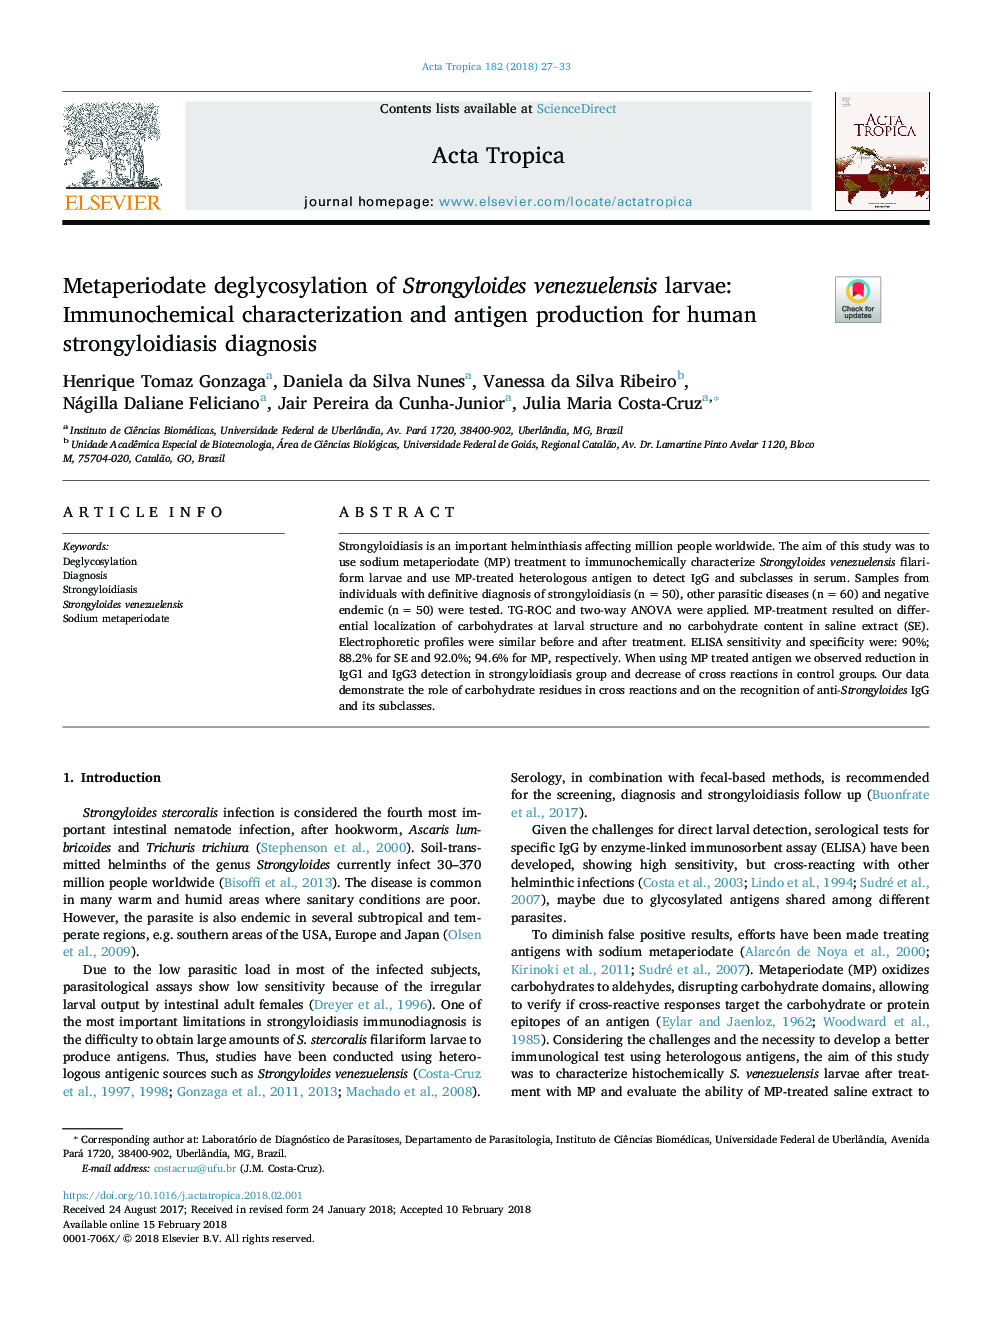 Metaperiodate deglycosylation of Strongyloides venezuelensis larvae: Immunochemical characterization and antigen production for human strongyloidiasis diagnosis